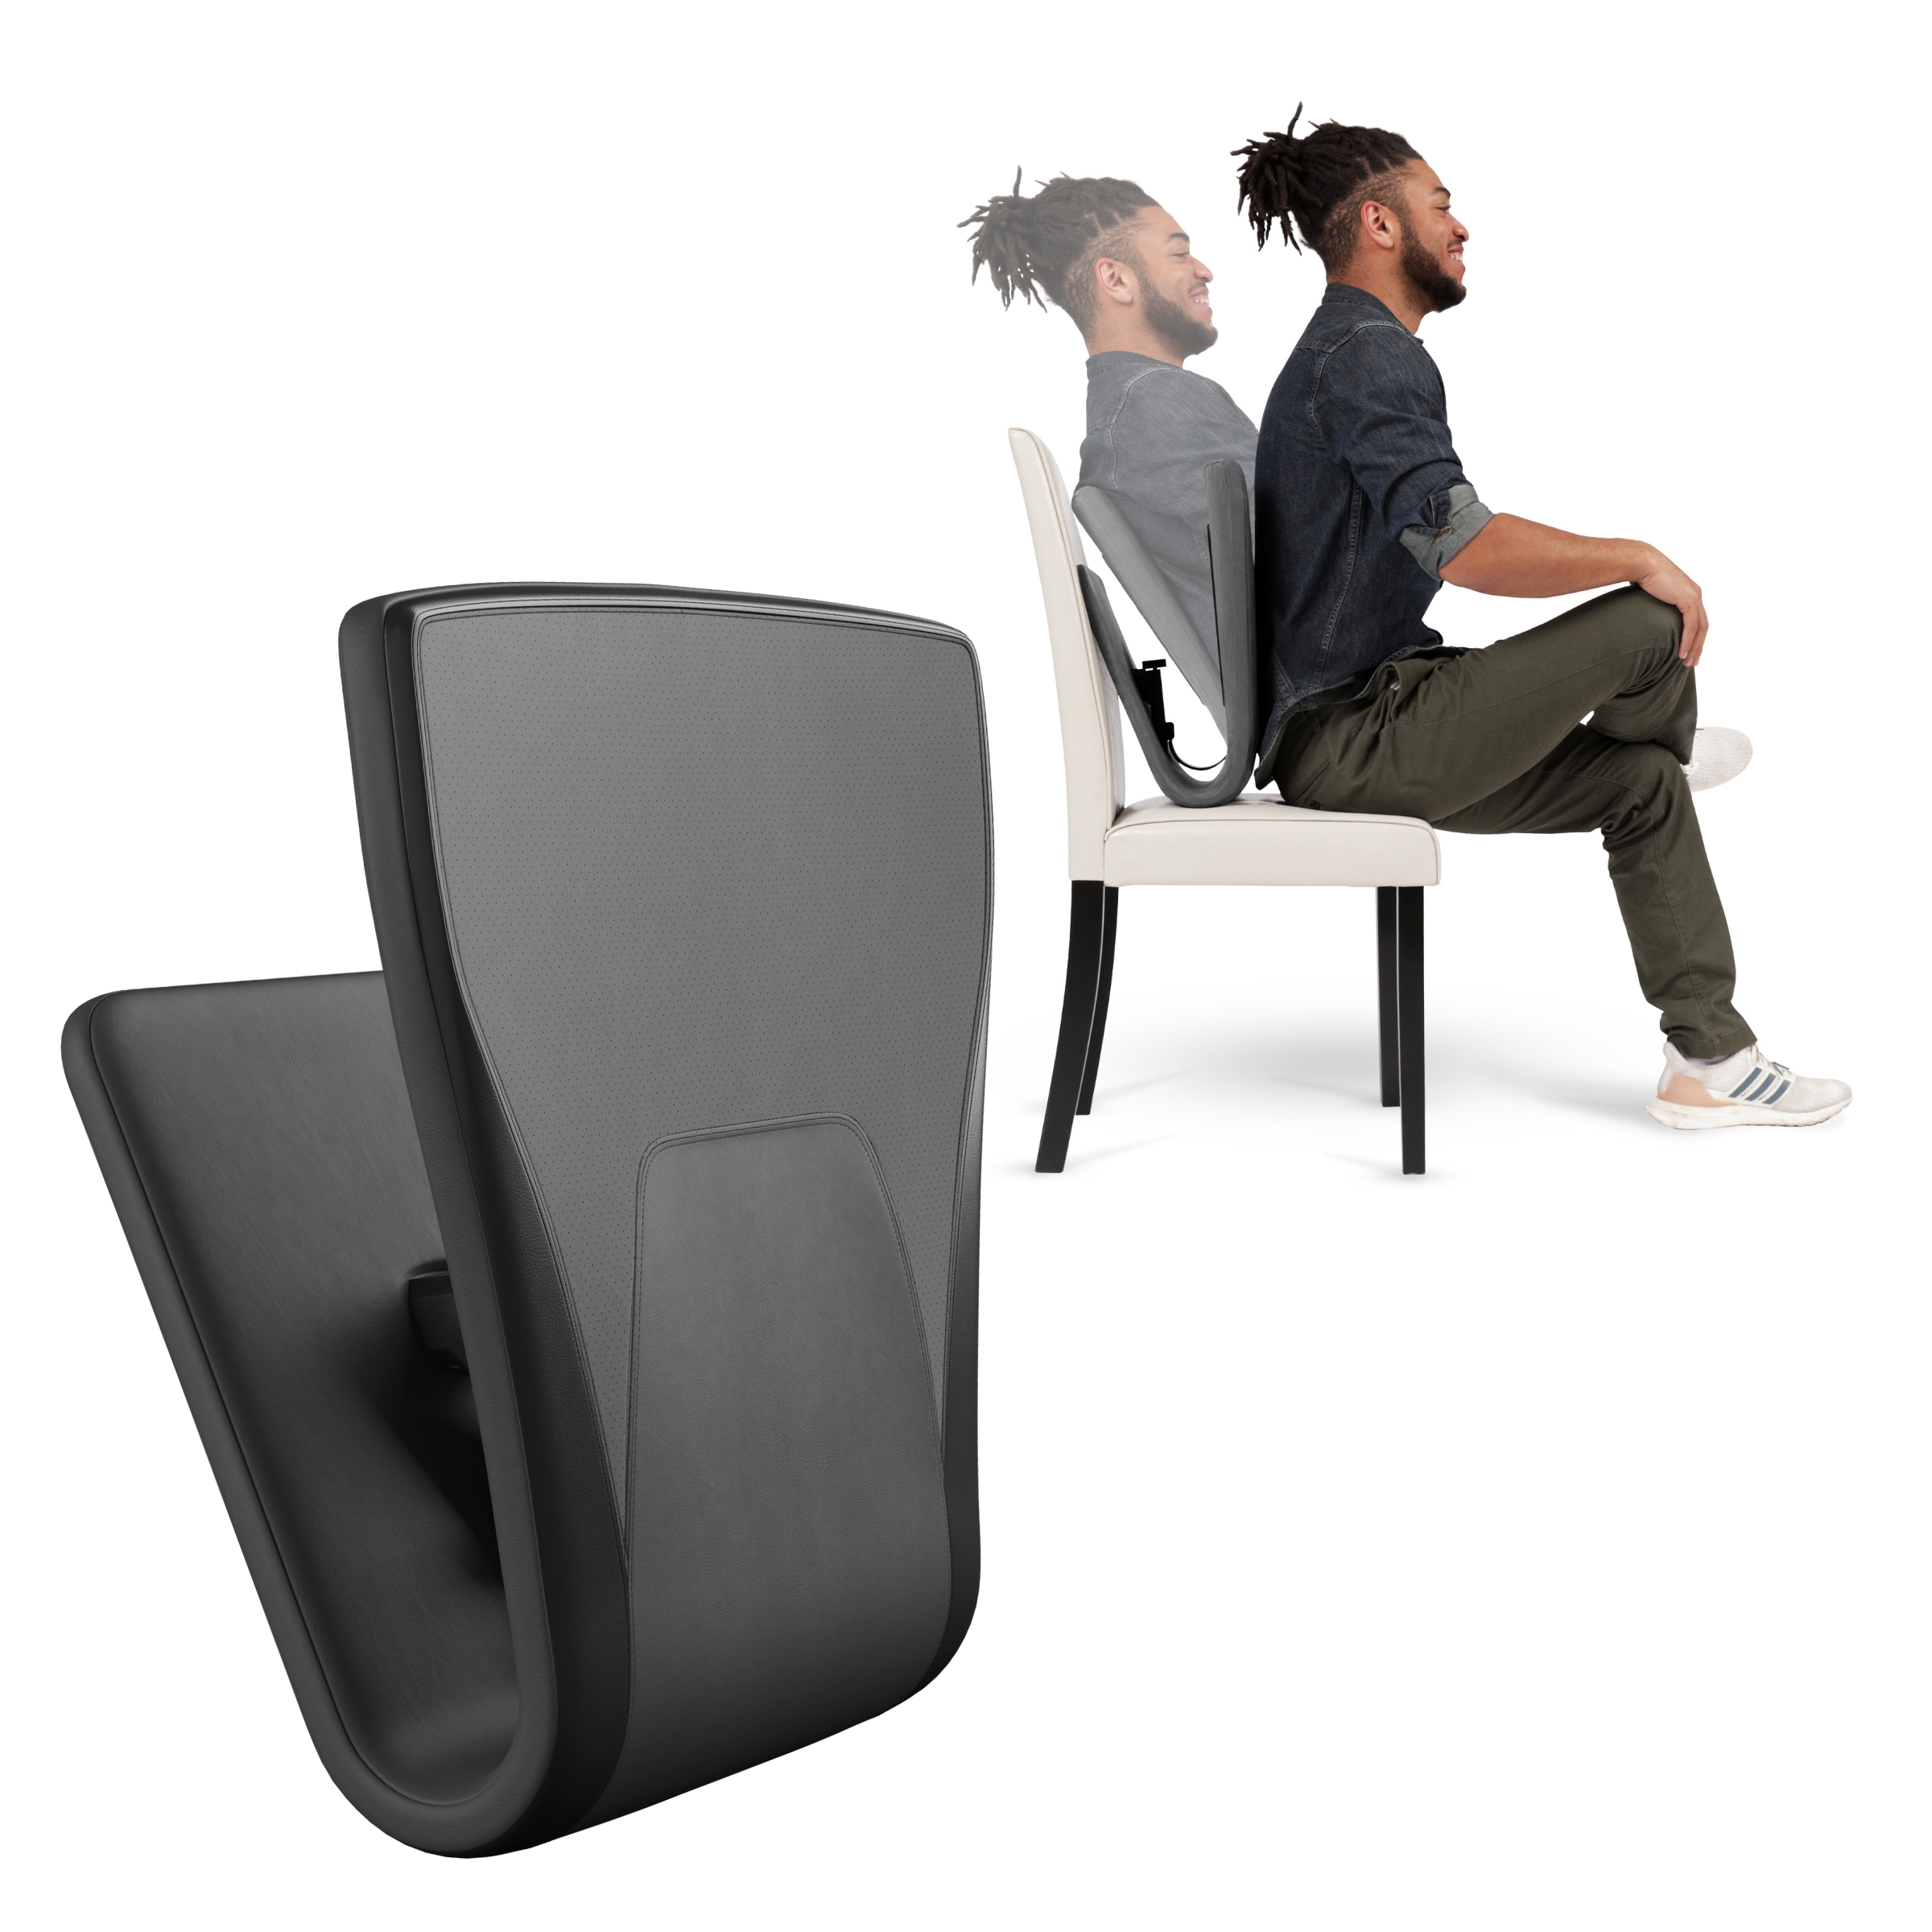 Adjustable neck pillow hangs over your seat for FIRM head, neck, or back  support on any recliner, chair, or seat. - Body Prop® Support Pillows